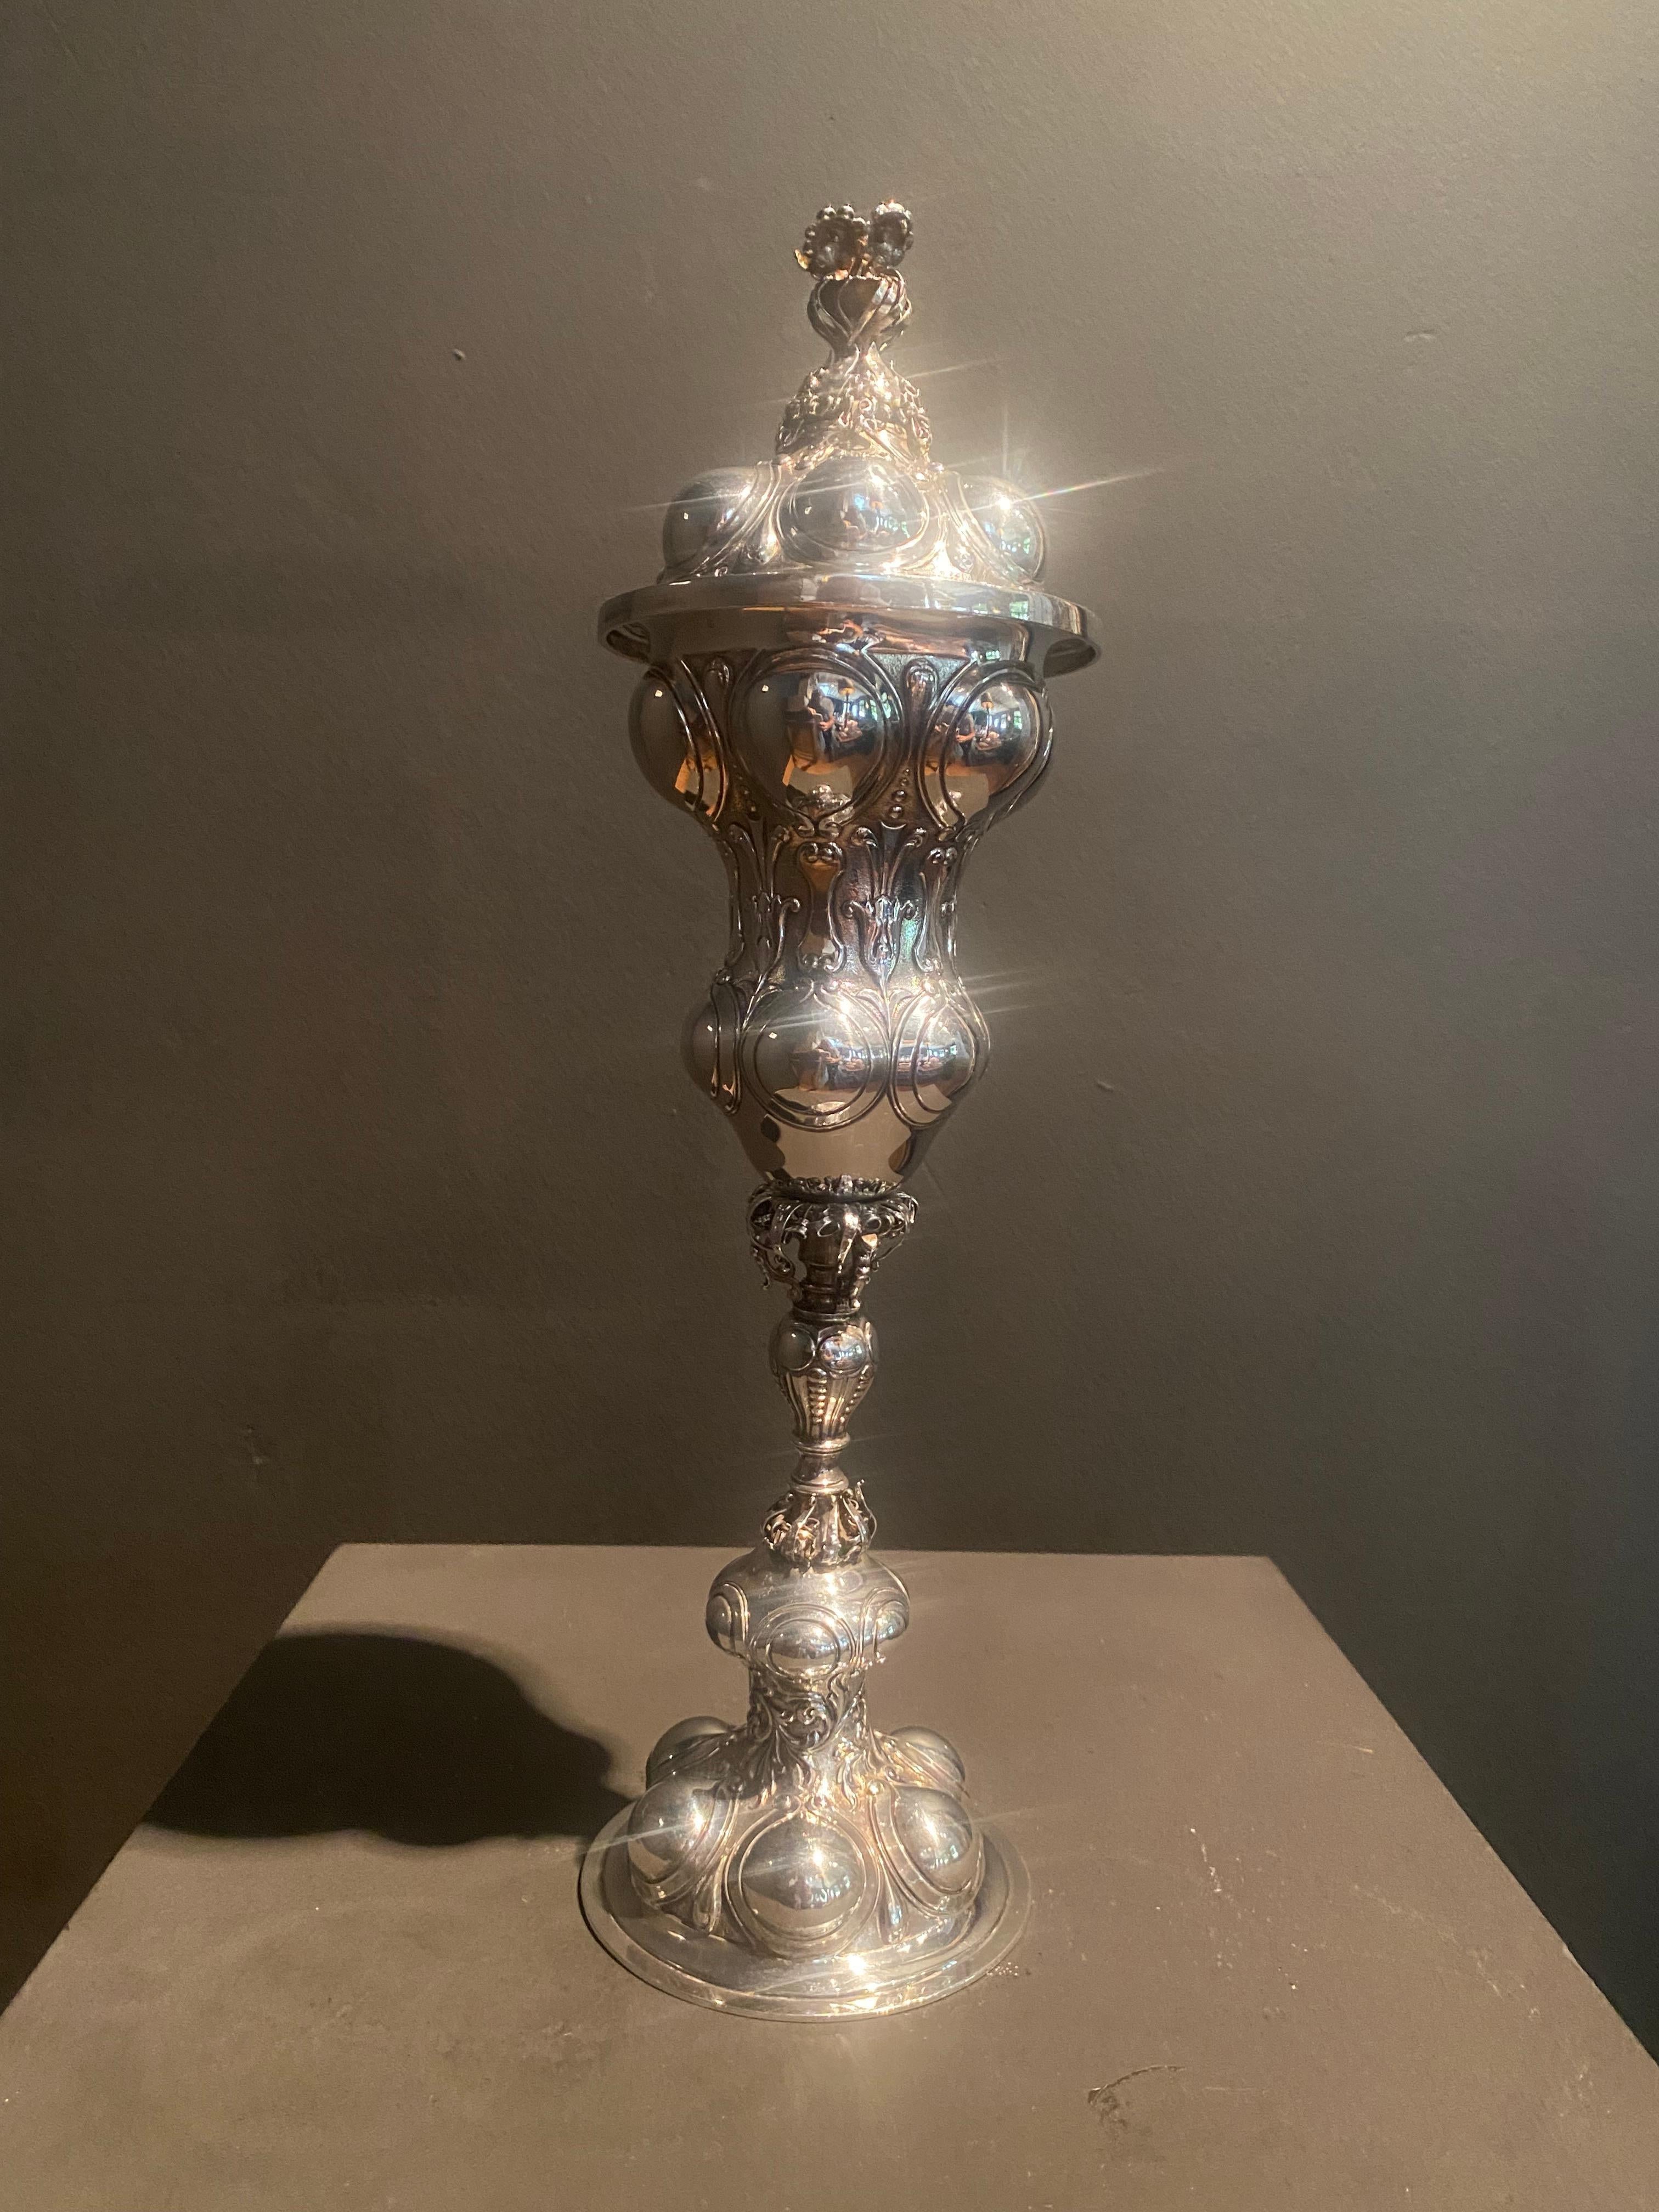 Exceptional Dutch Colombine Cop In Solid Silver,
Dated by the Hallmark 1902,
a cup with lid on a single column with extended foot on 6 outbound bowls,
very fine engraved ornaments,
gracious object to complete your Cabinet of Curiosities